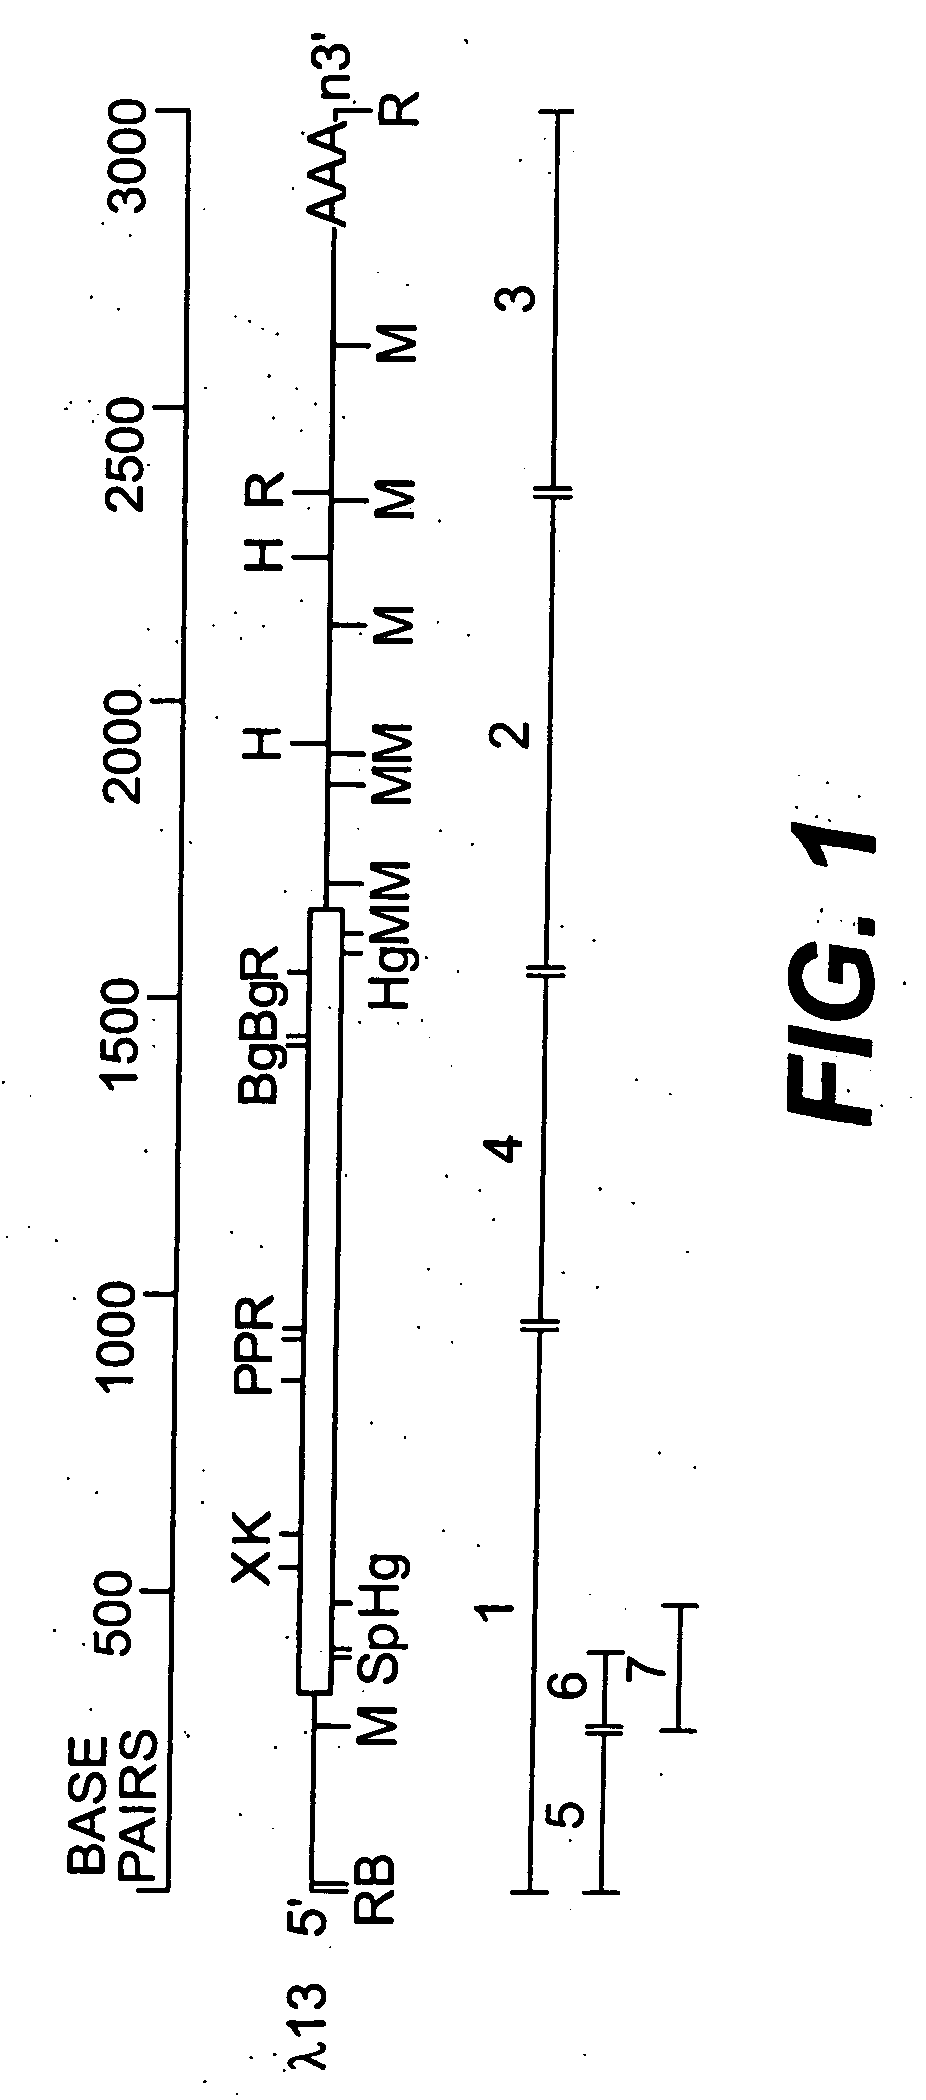 Novel steroid/thyroid hormone receptor-related gene, which is inappropriately expressed in human heptocellular carcinoma, and which is a retinoic acid receptor